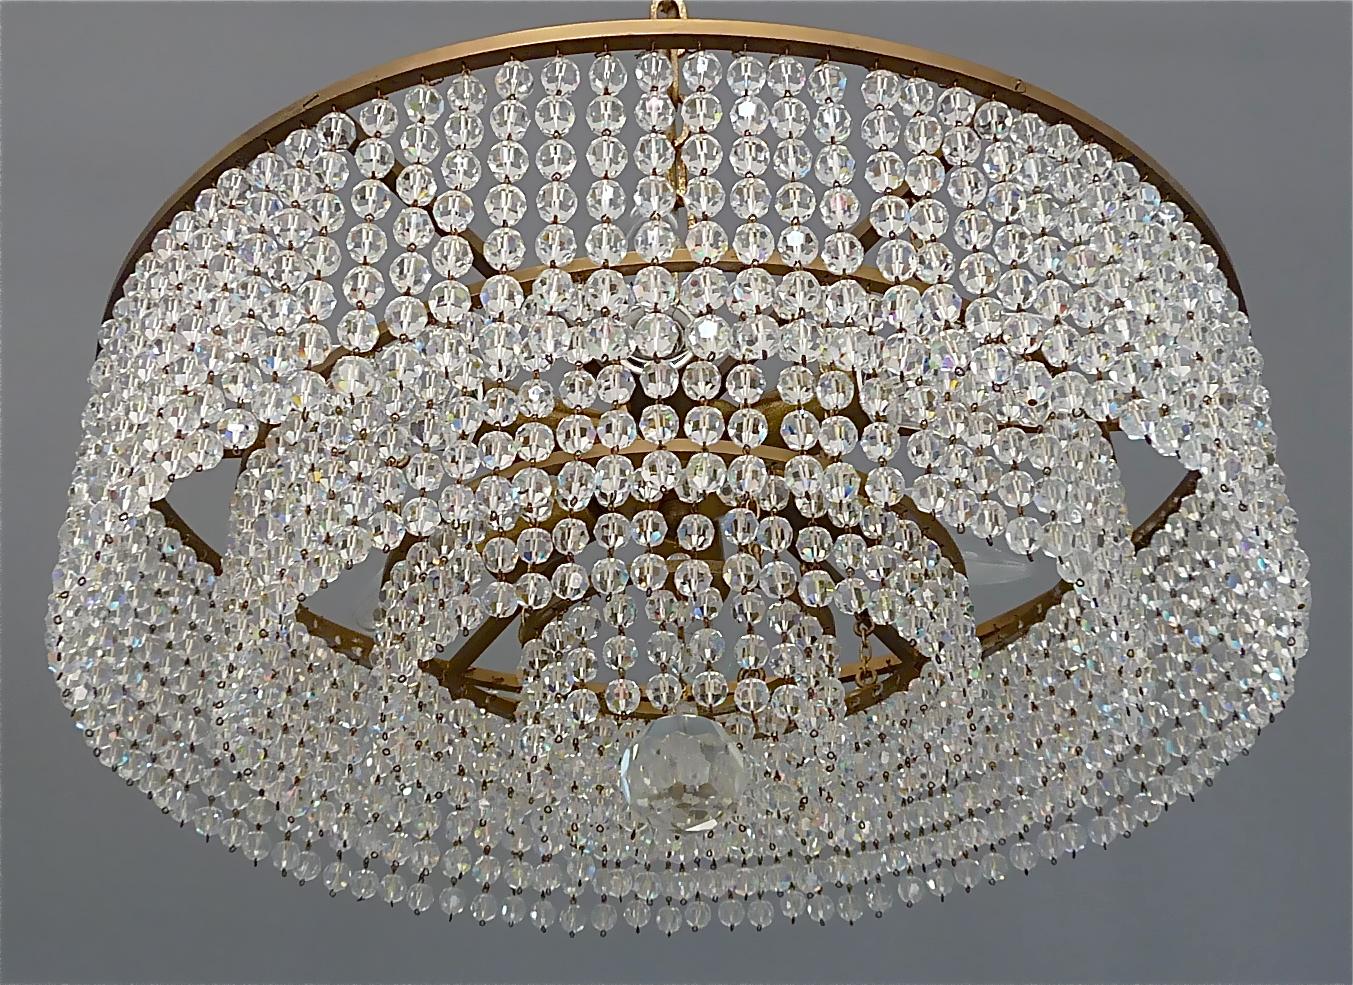 Lobmeyr Crystal Glass String Chandelier Patinated Brass Austria 1950s, No.2 of 2 For Sale 8